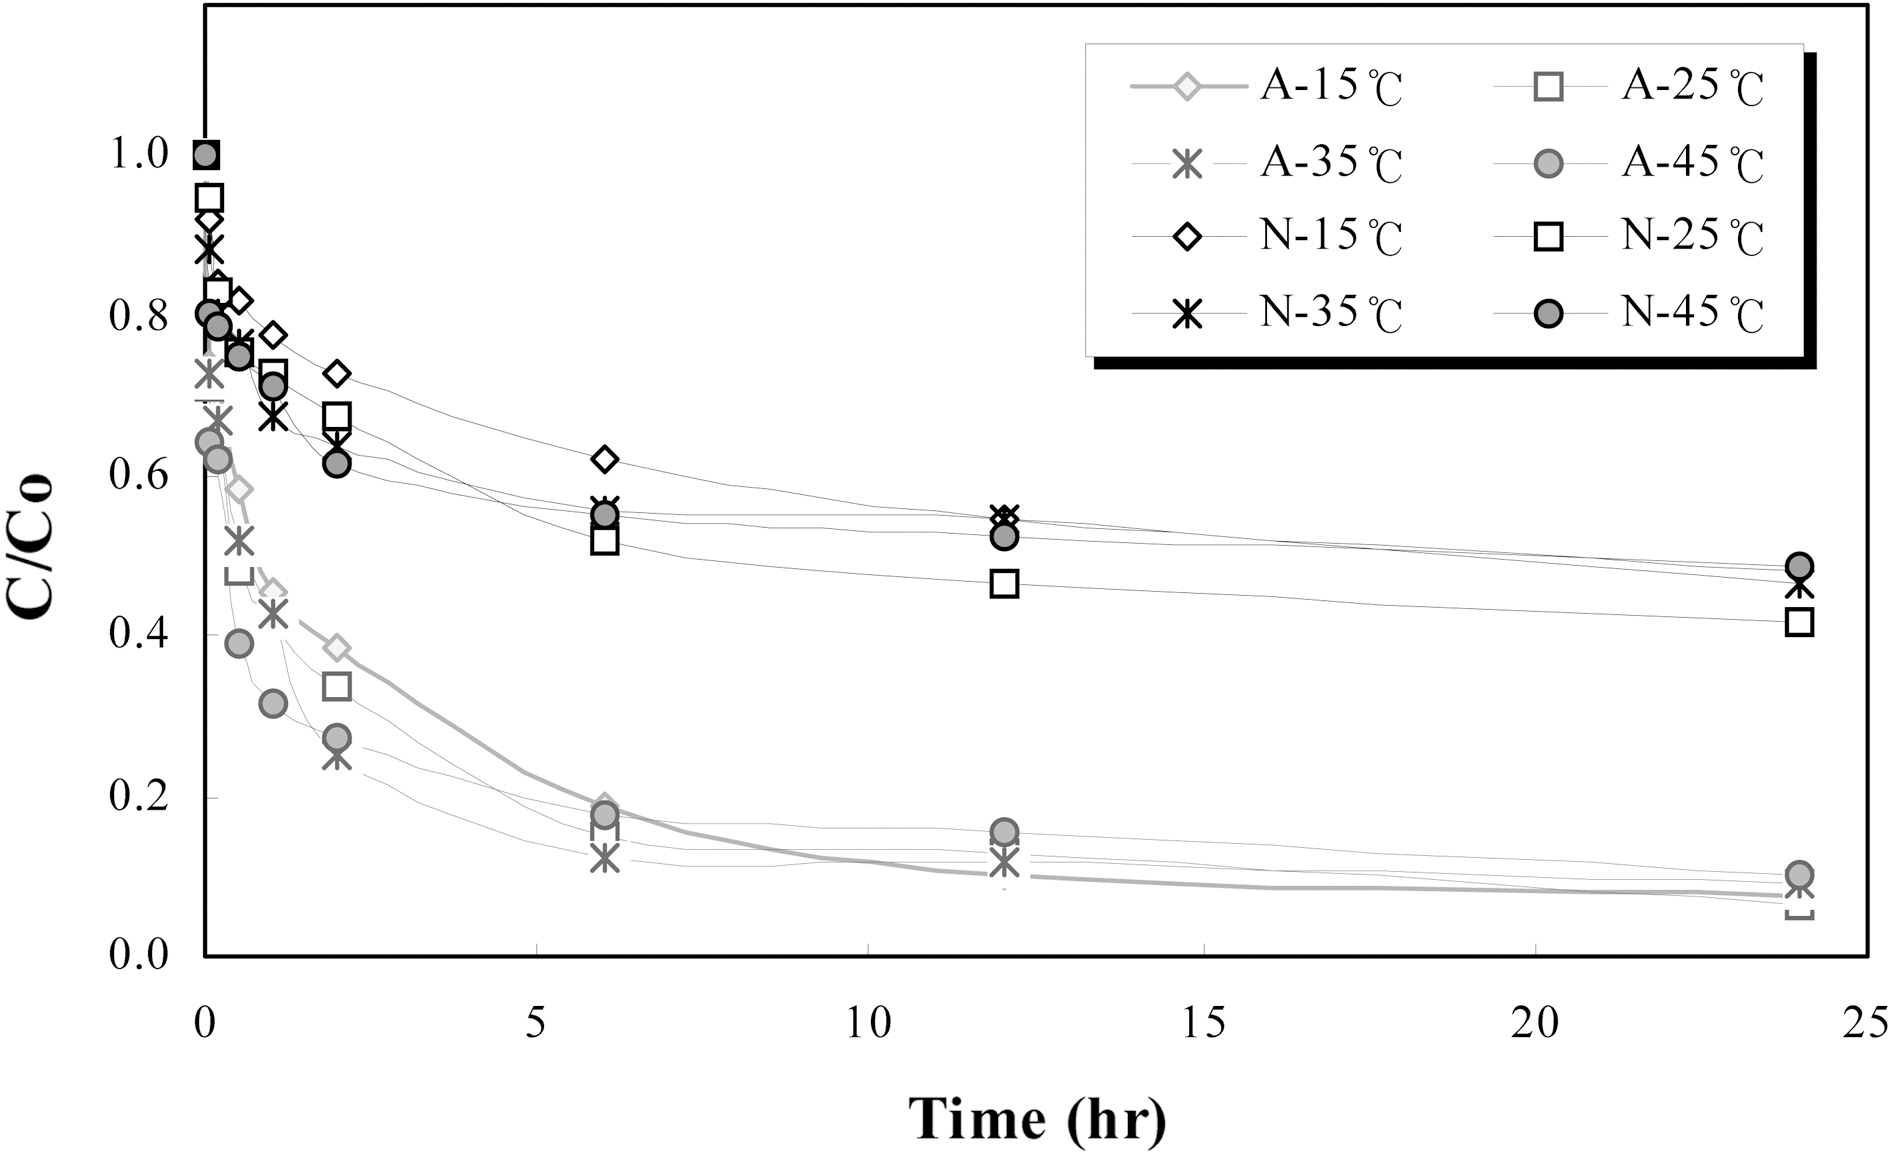 Sorption kinetics of ammonium and nitrate as a function of time at different temperature (A:ammonium; N:nitrate).